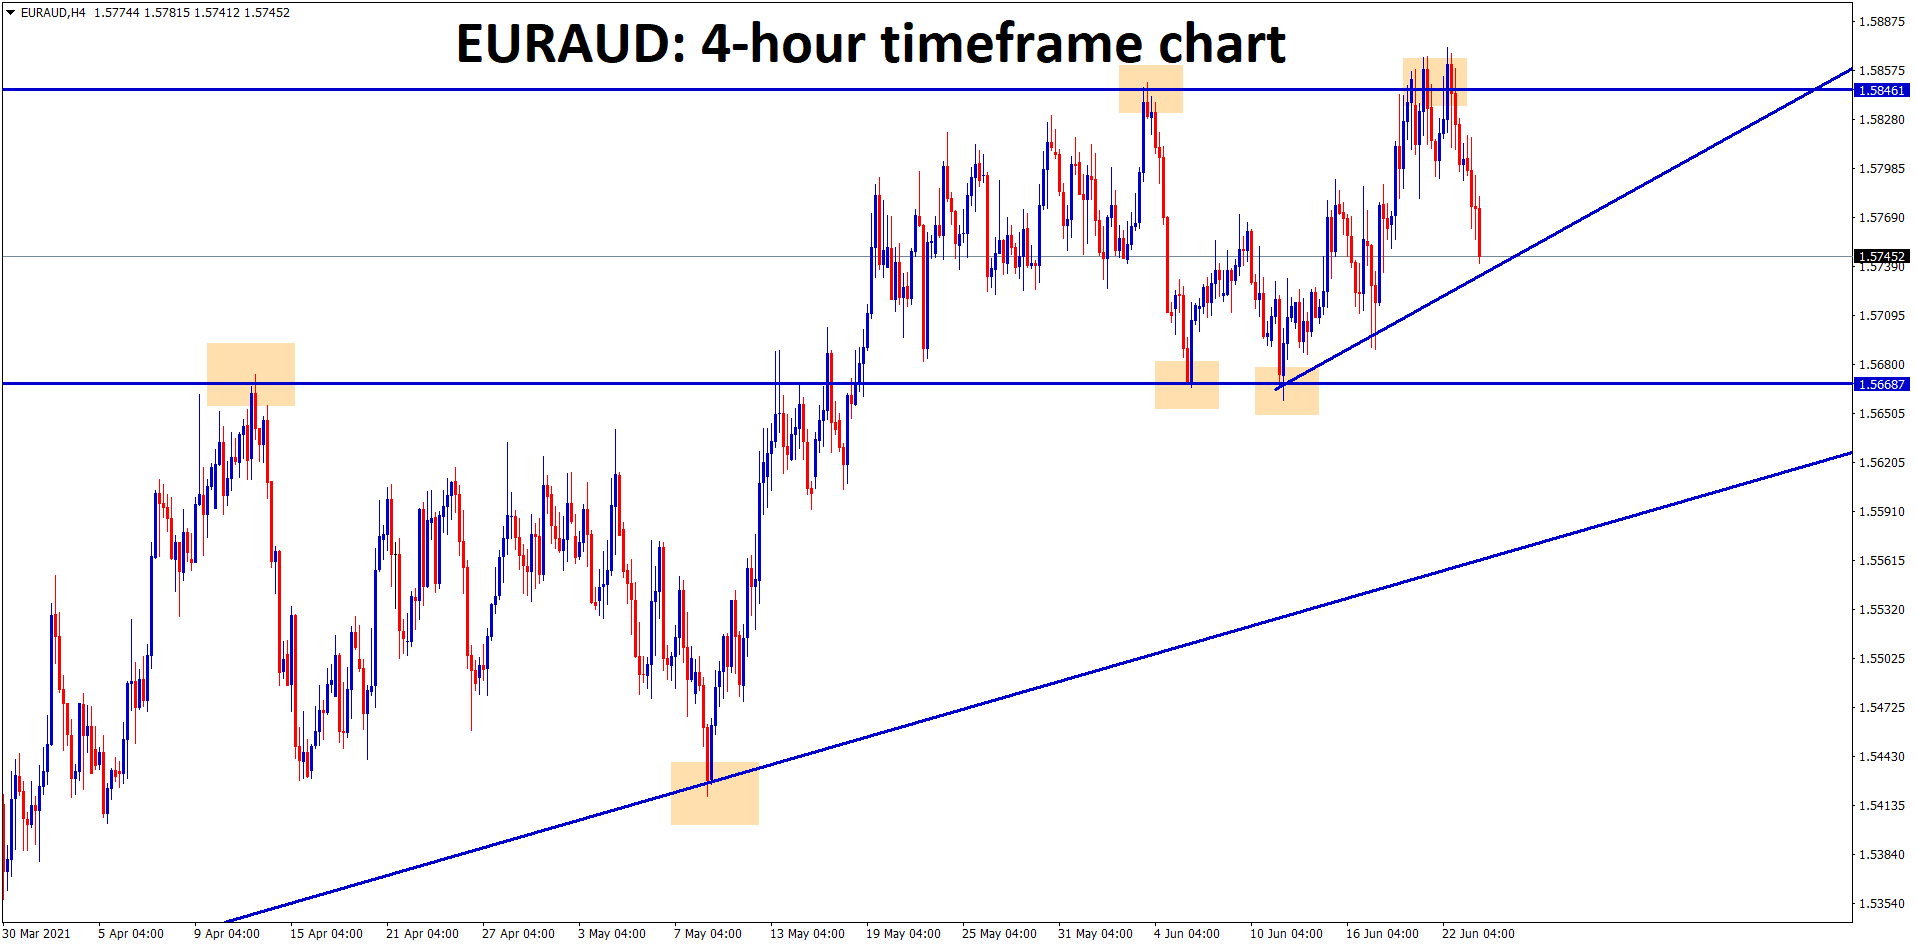 EURAUD is forming an another Ascending Triangle